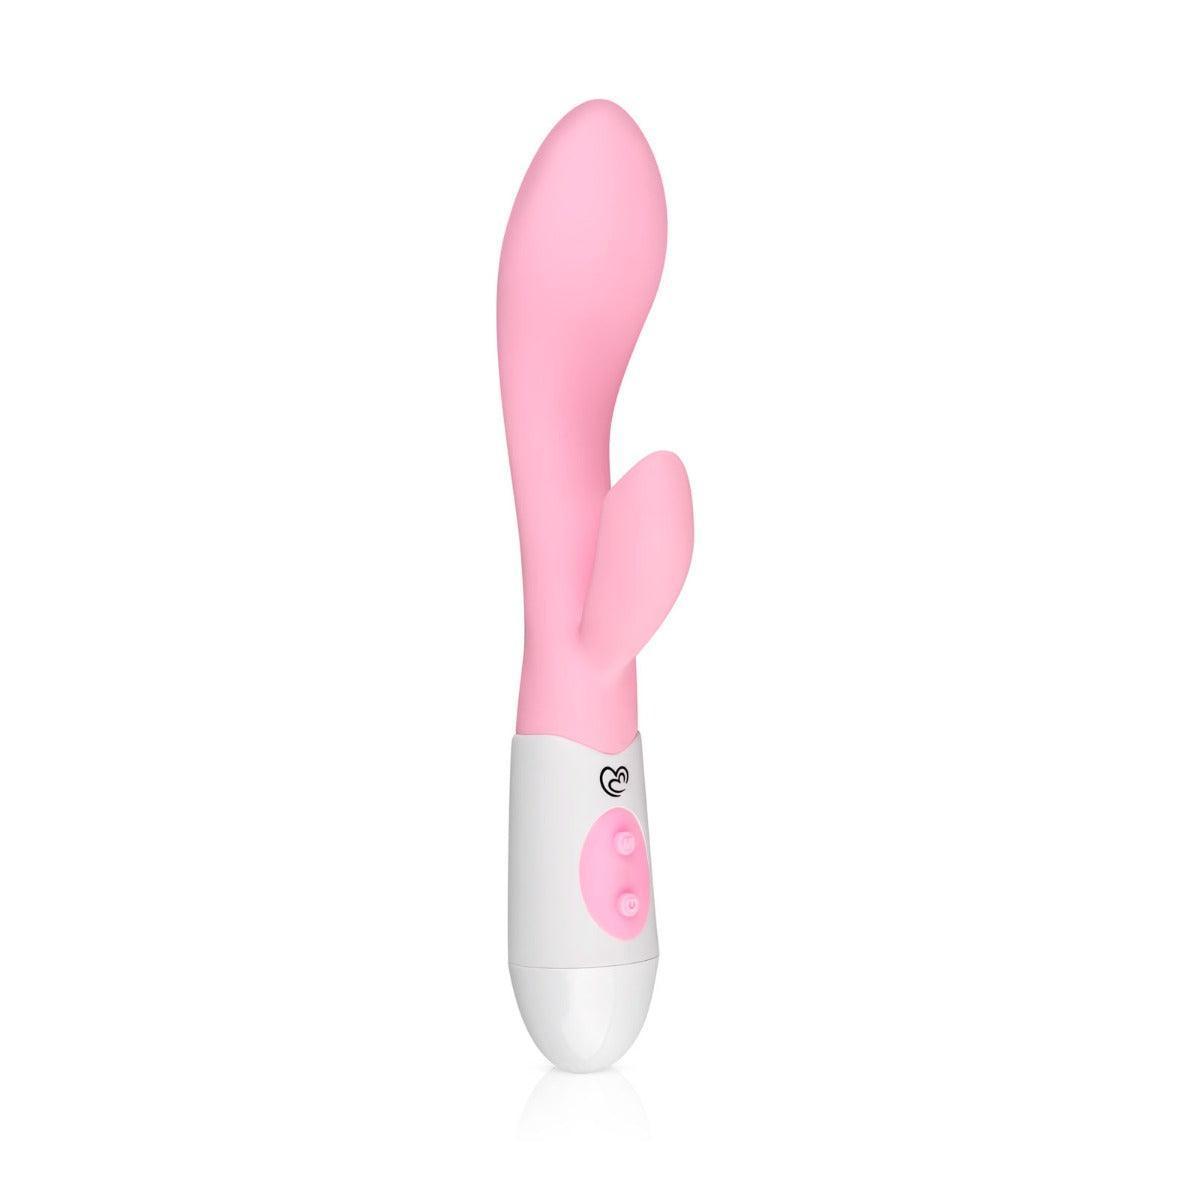 Loveboxxx - I Love Pink Couples Sex Toy Gift Box